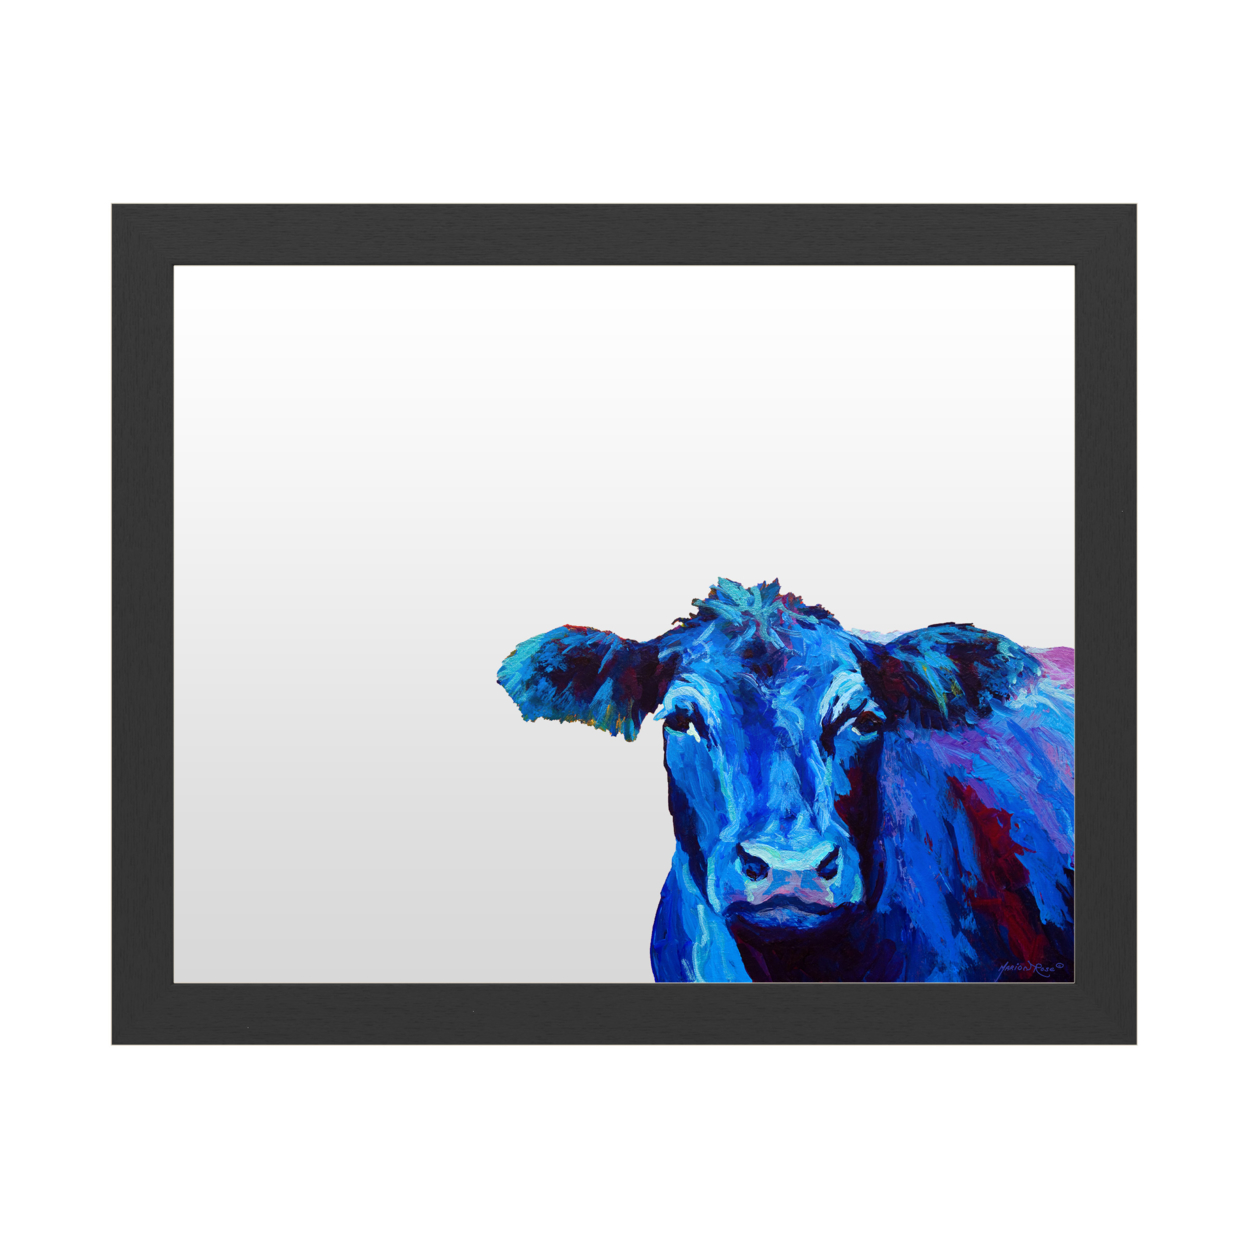 Dry Erase 16 X 20 Marker Board With Printed Artwork - Marion Rose Blue Cow White Board - Ready To Hang